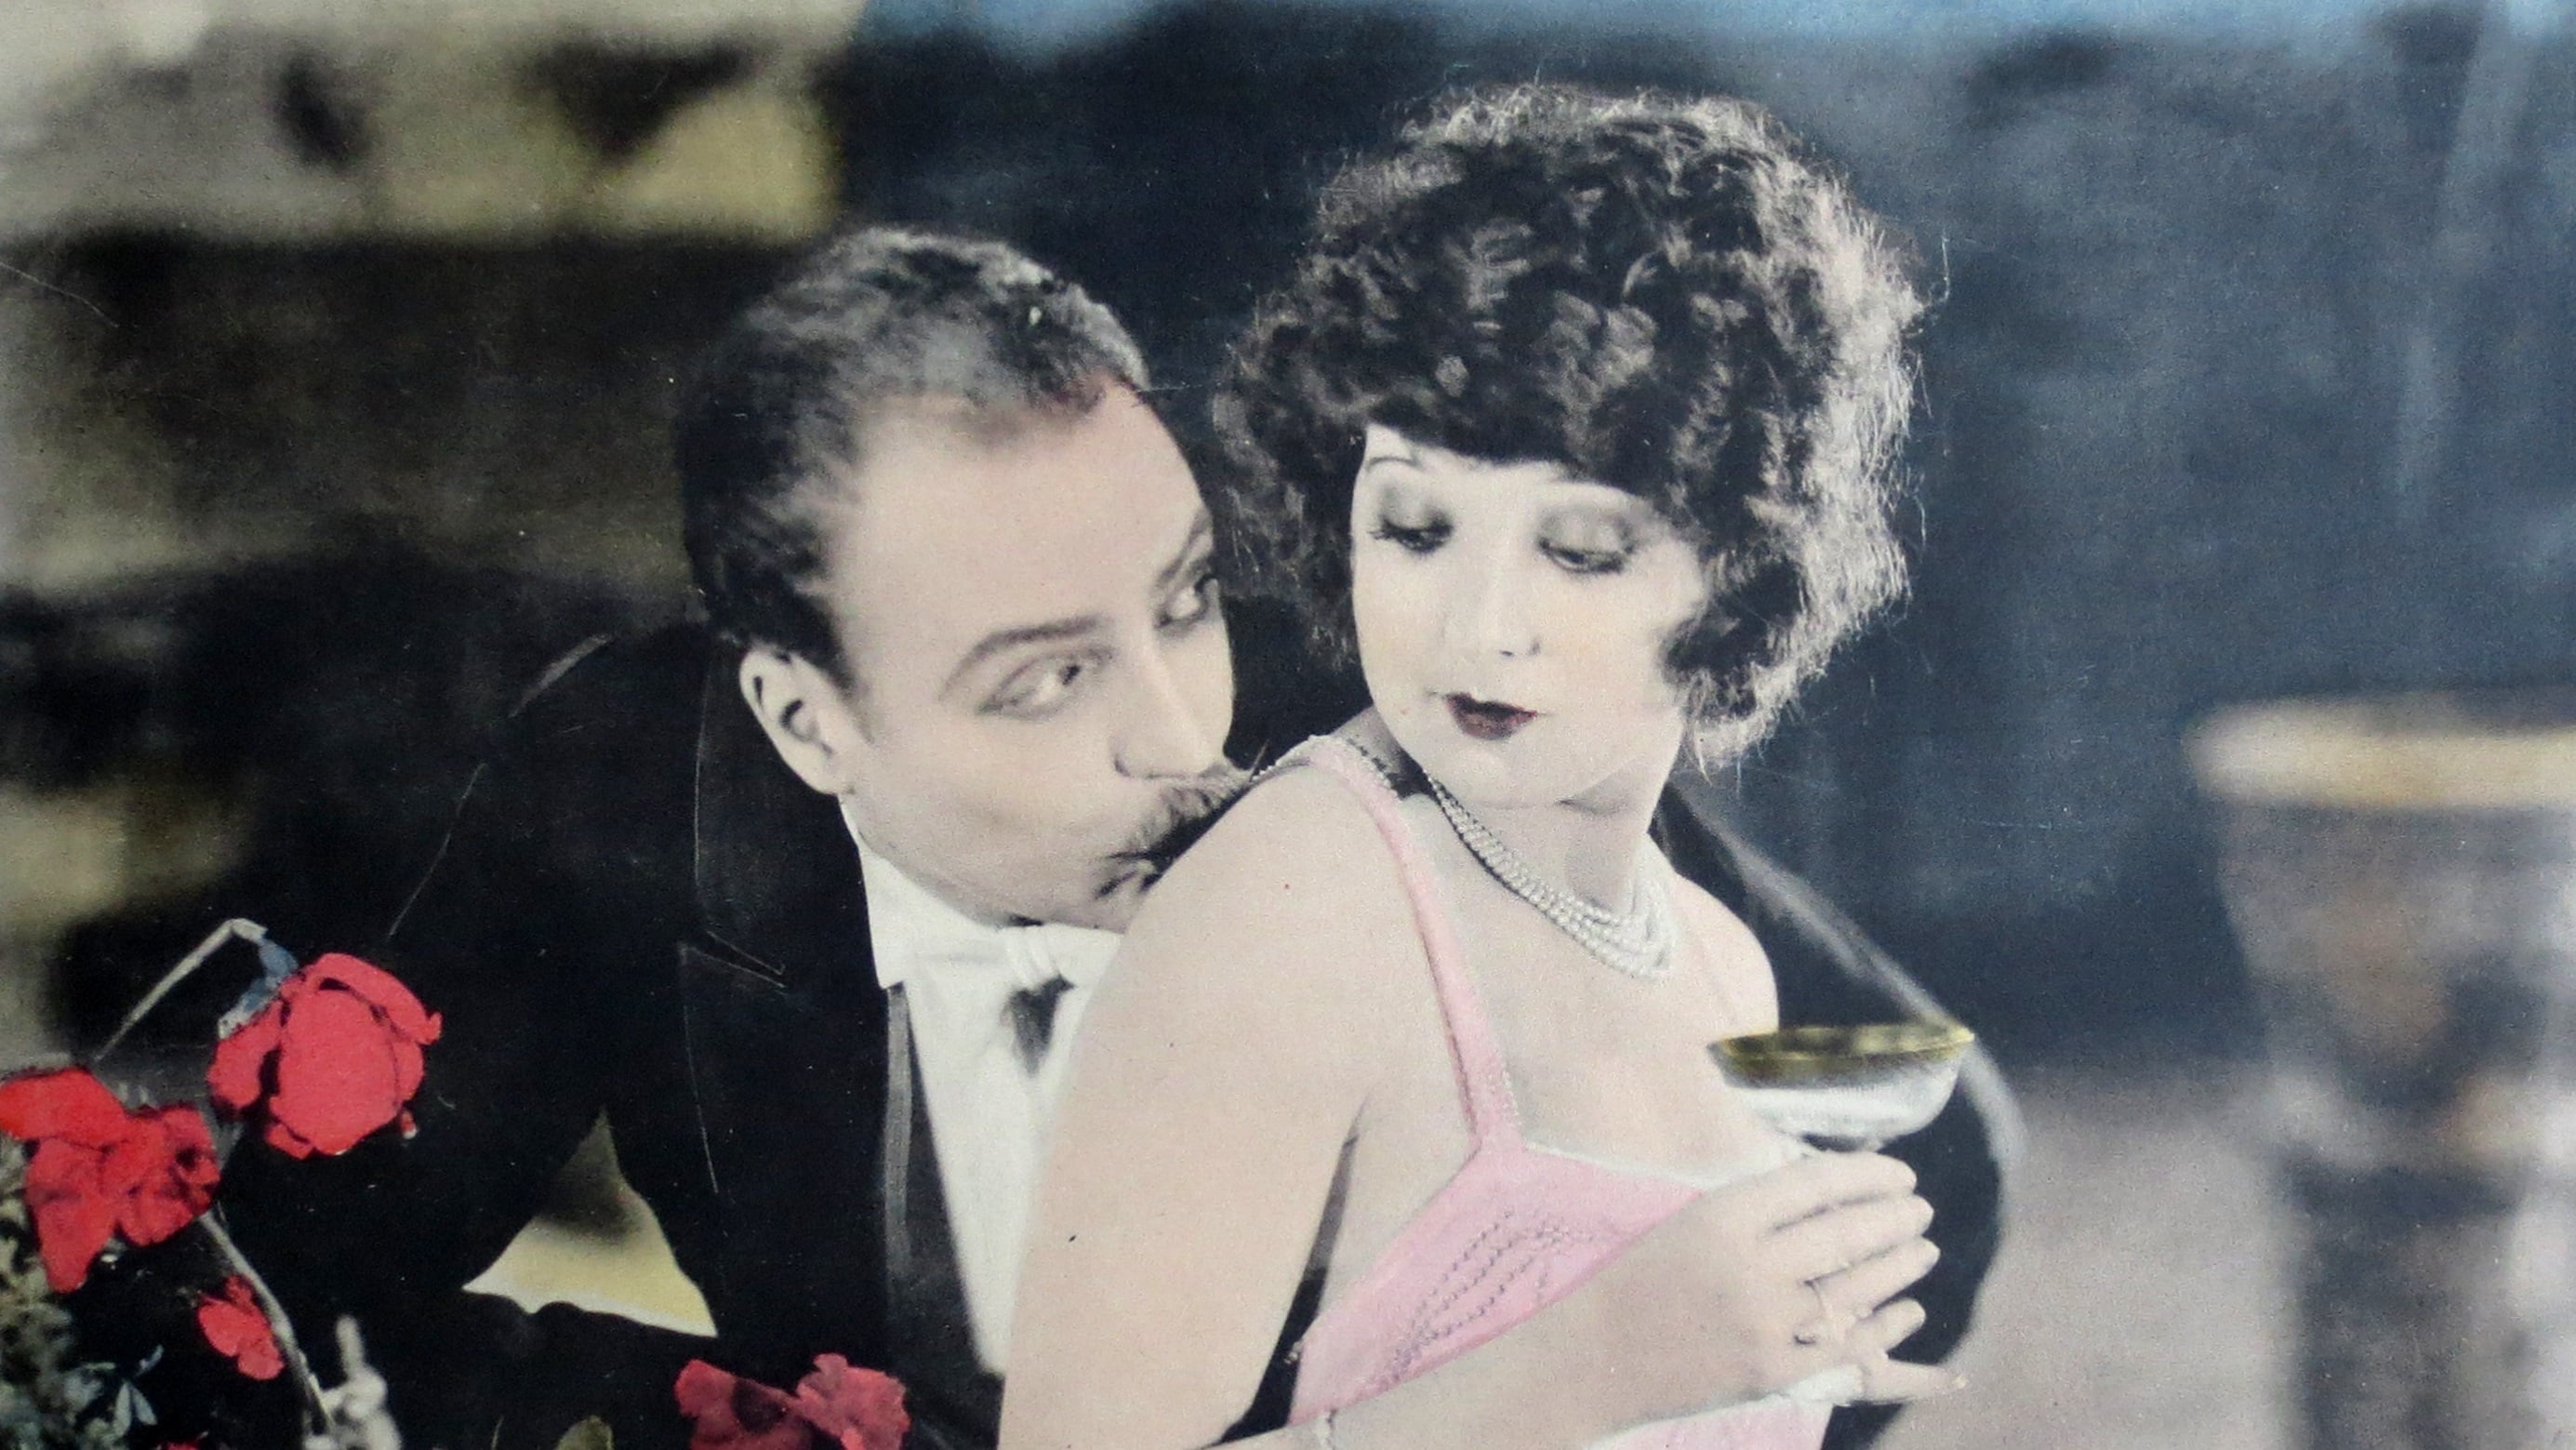 The Dancers (1925)